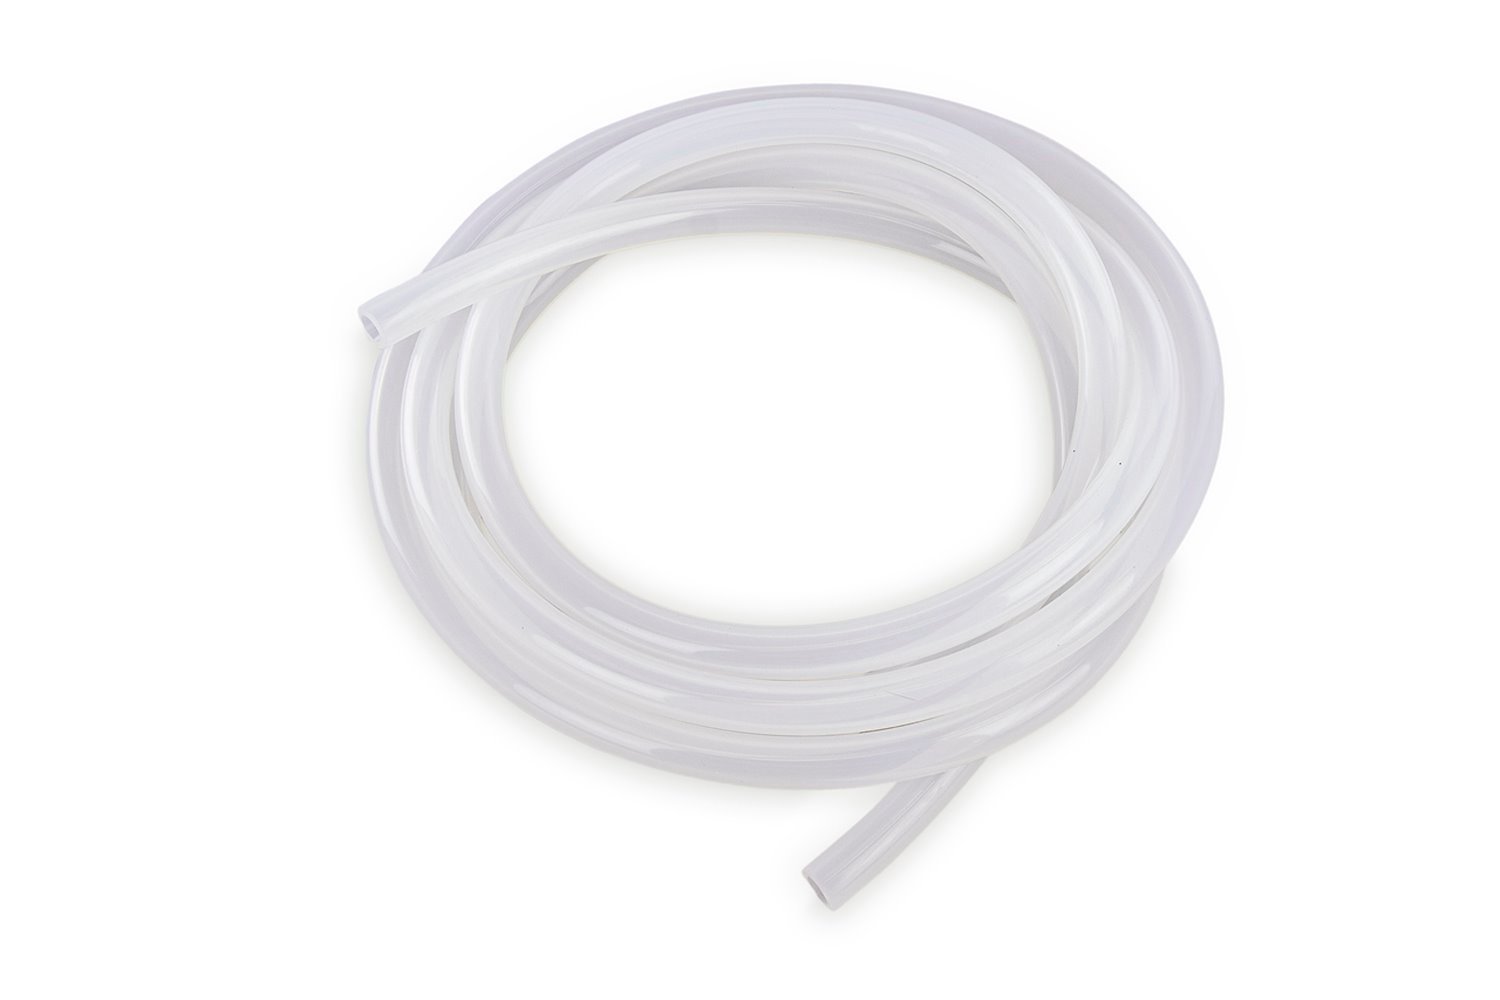 HTSVH6-CLEARx5 High-Temperature Silicone Vacuum Hose Tubing, 1/4 in. ID, 5 ft. Roll, Clear